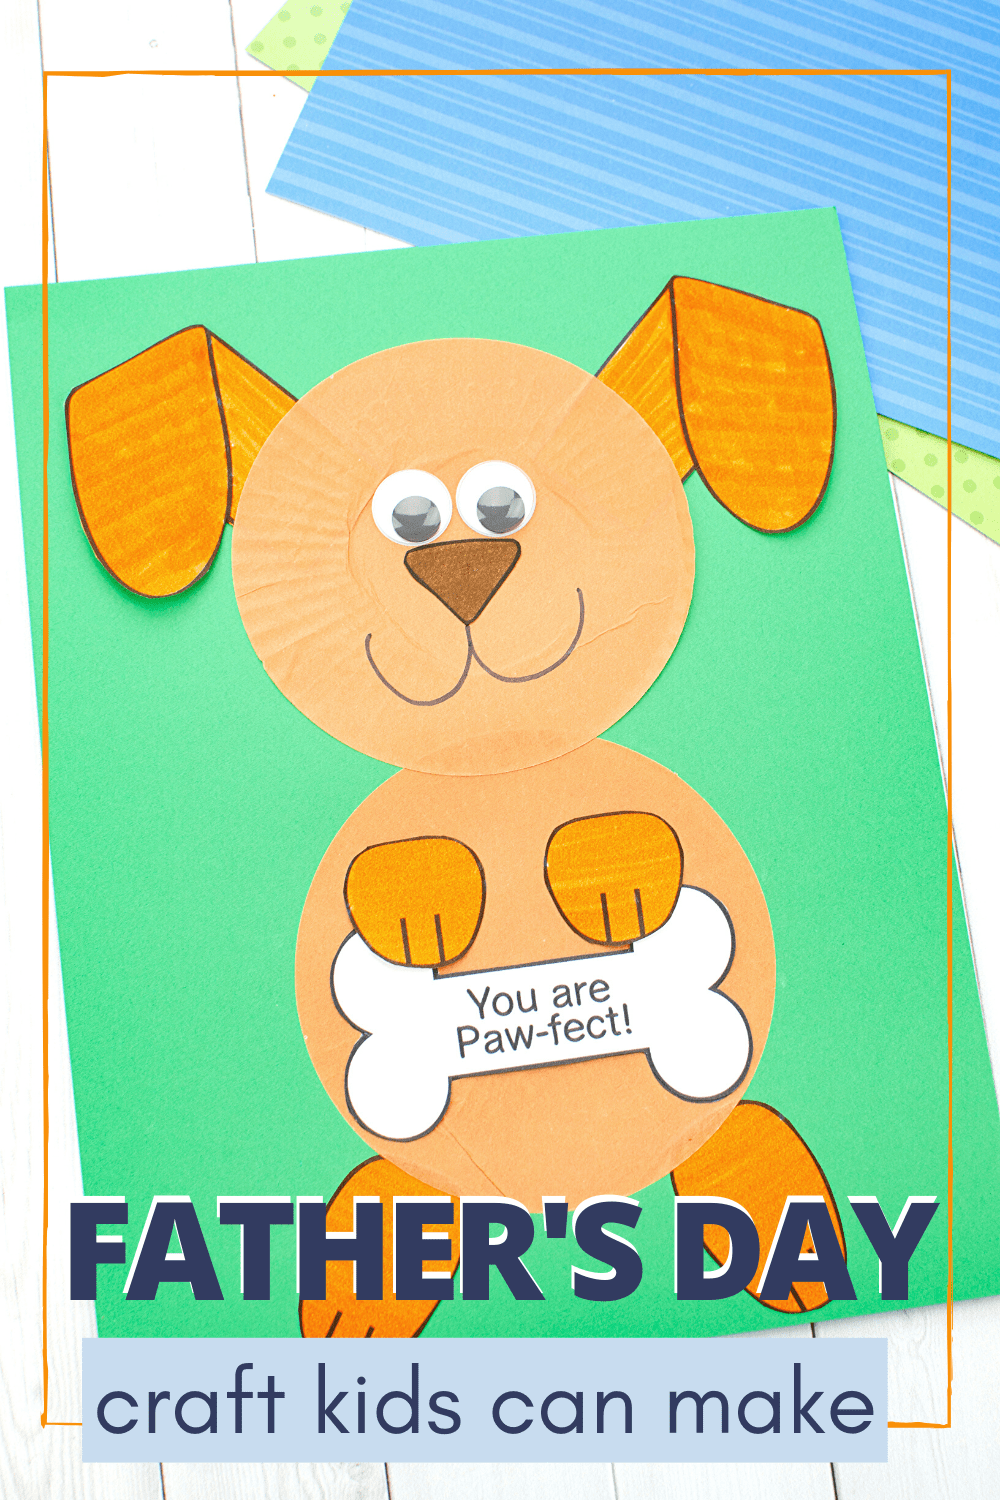 Don't miss this easy Fathers Day craft that kids can make. With just a few simple supplies, kids can show Dad how much they love him!